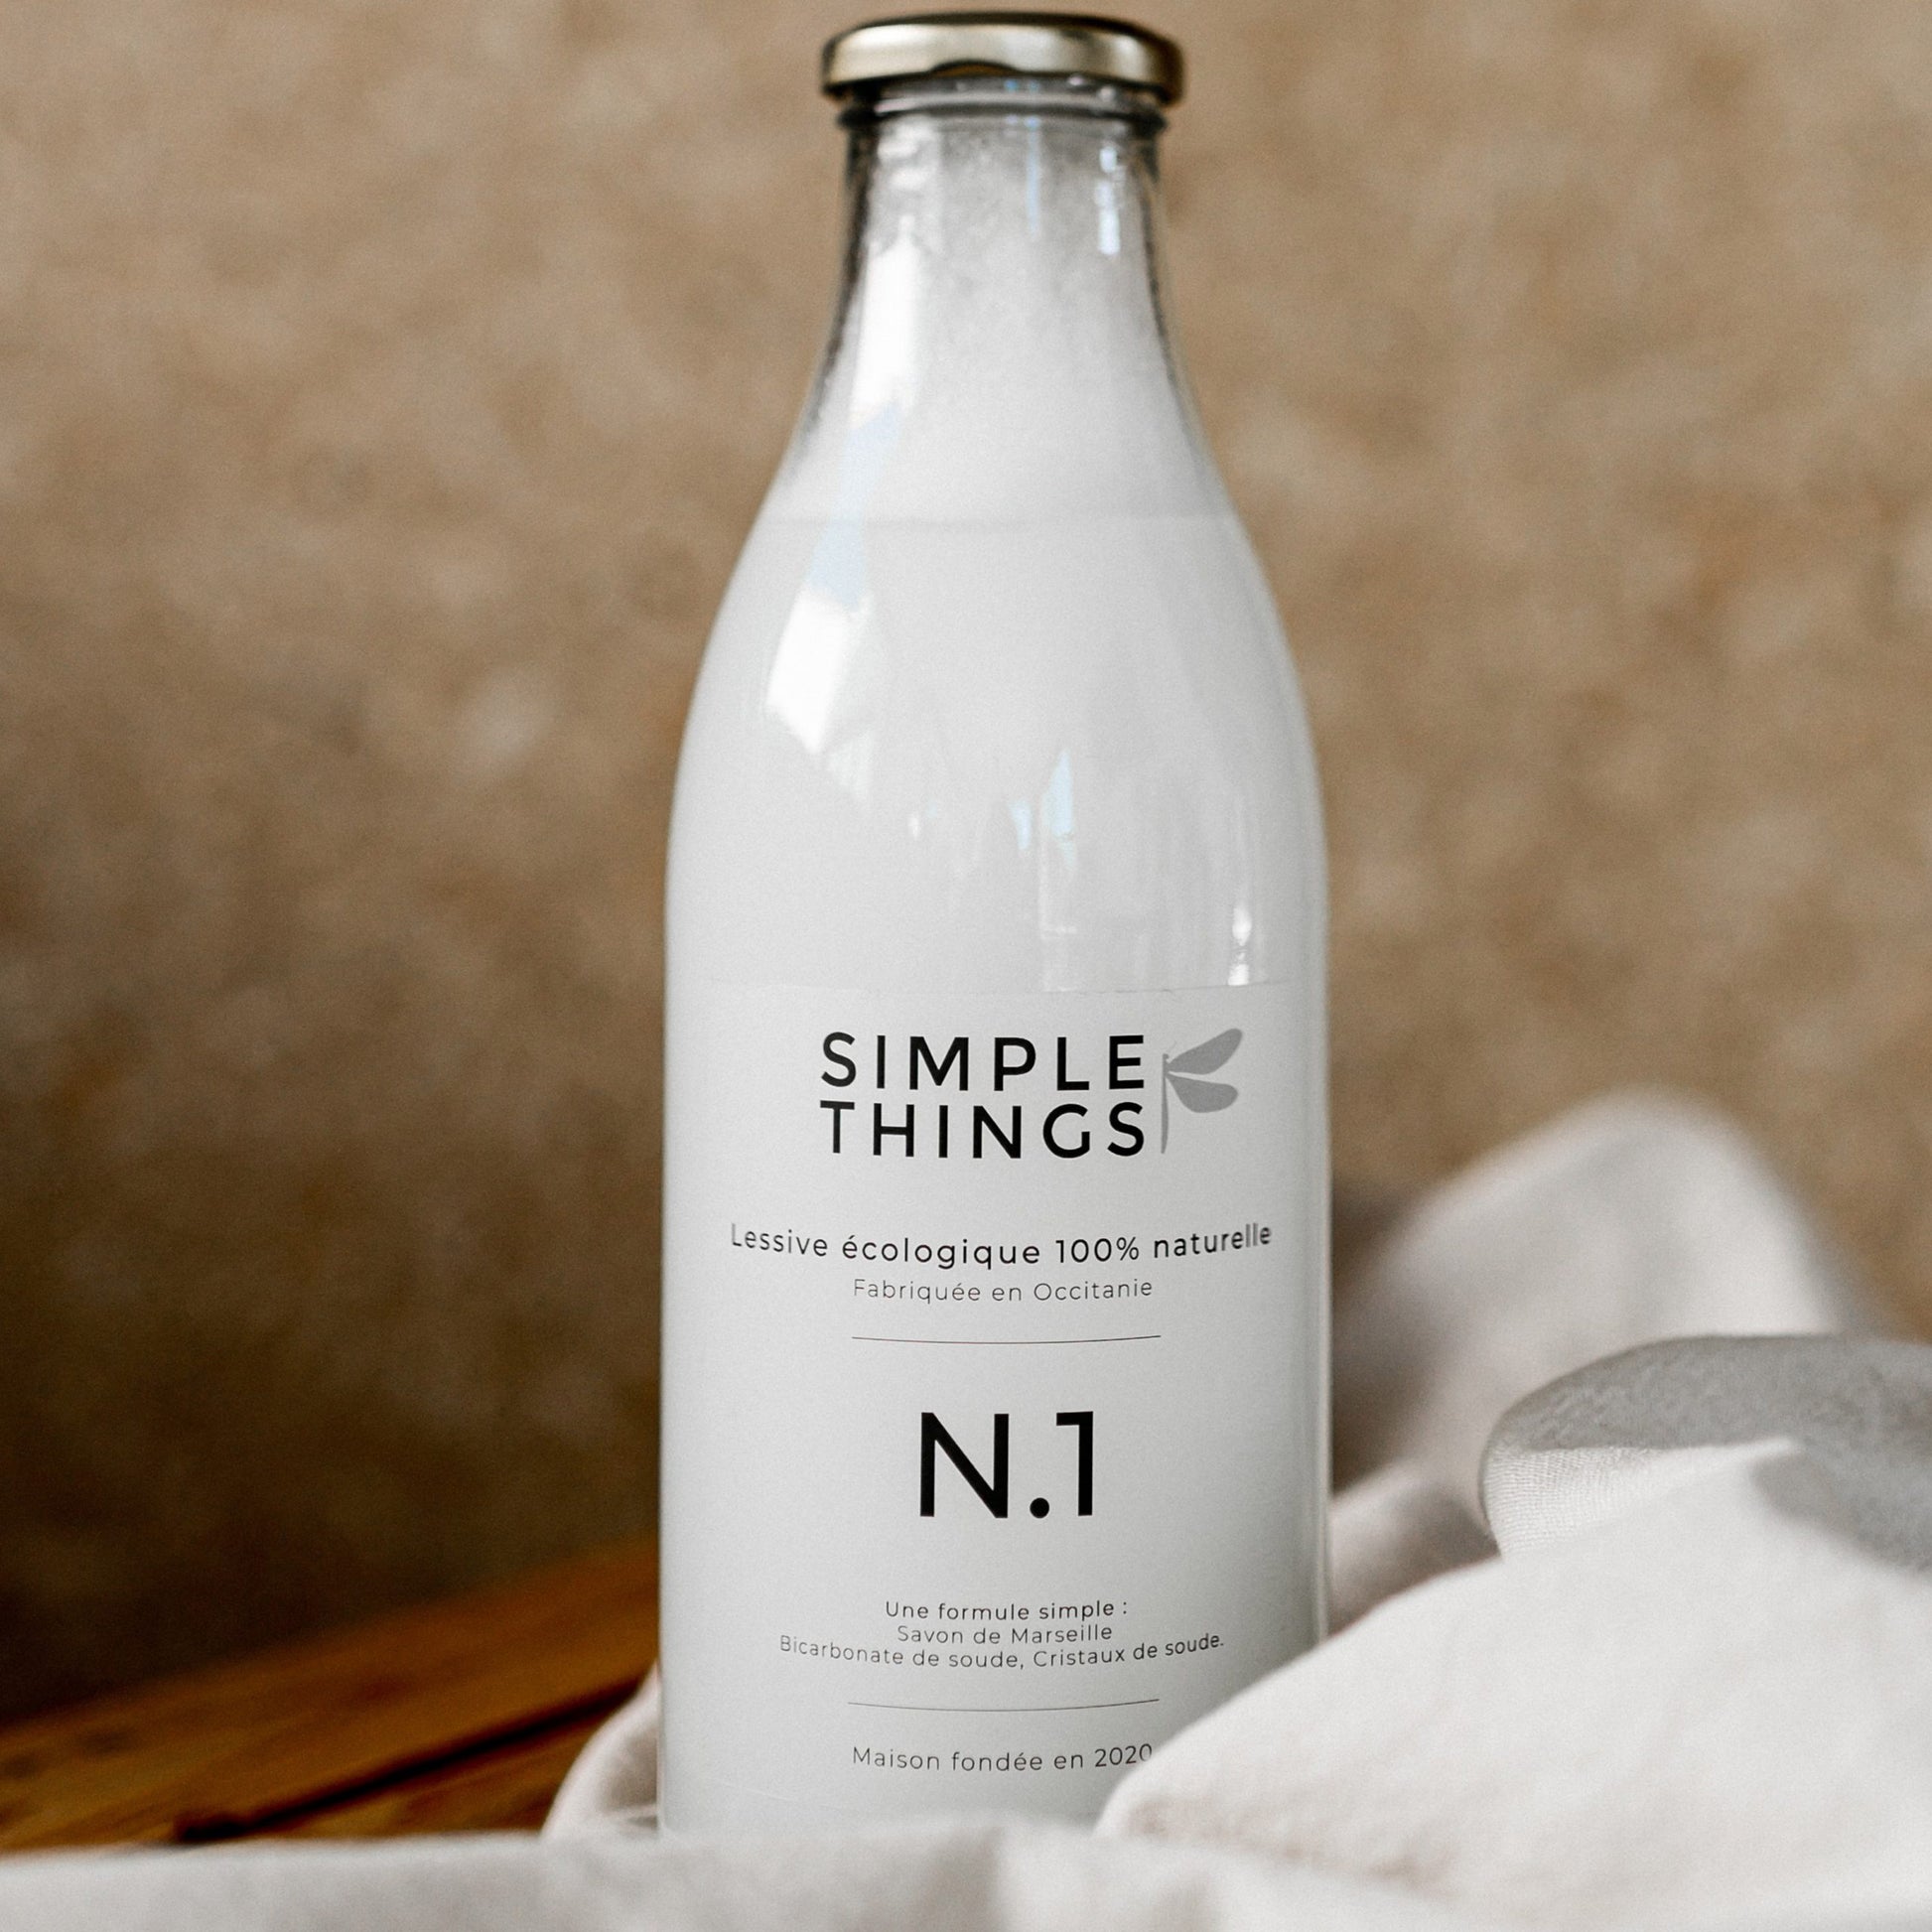 Lessive naturelle - Bouteille 1 litre - Simplethings